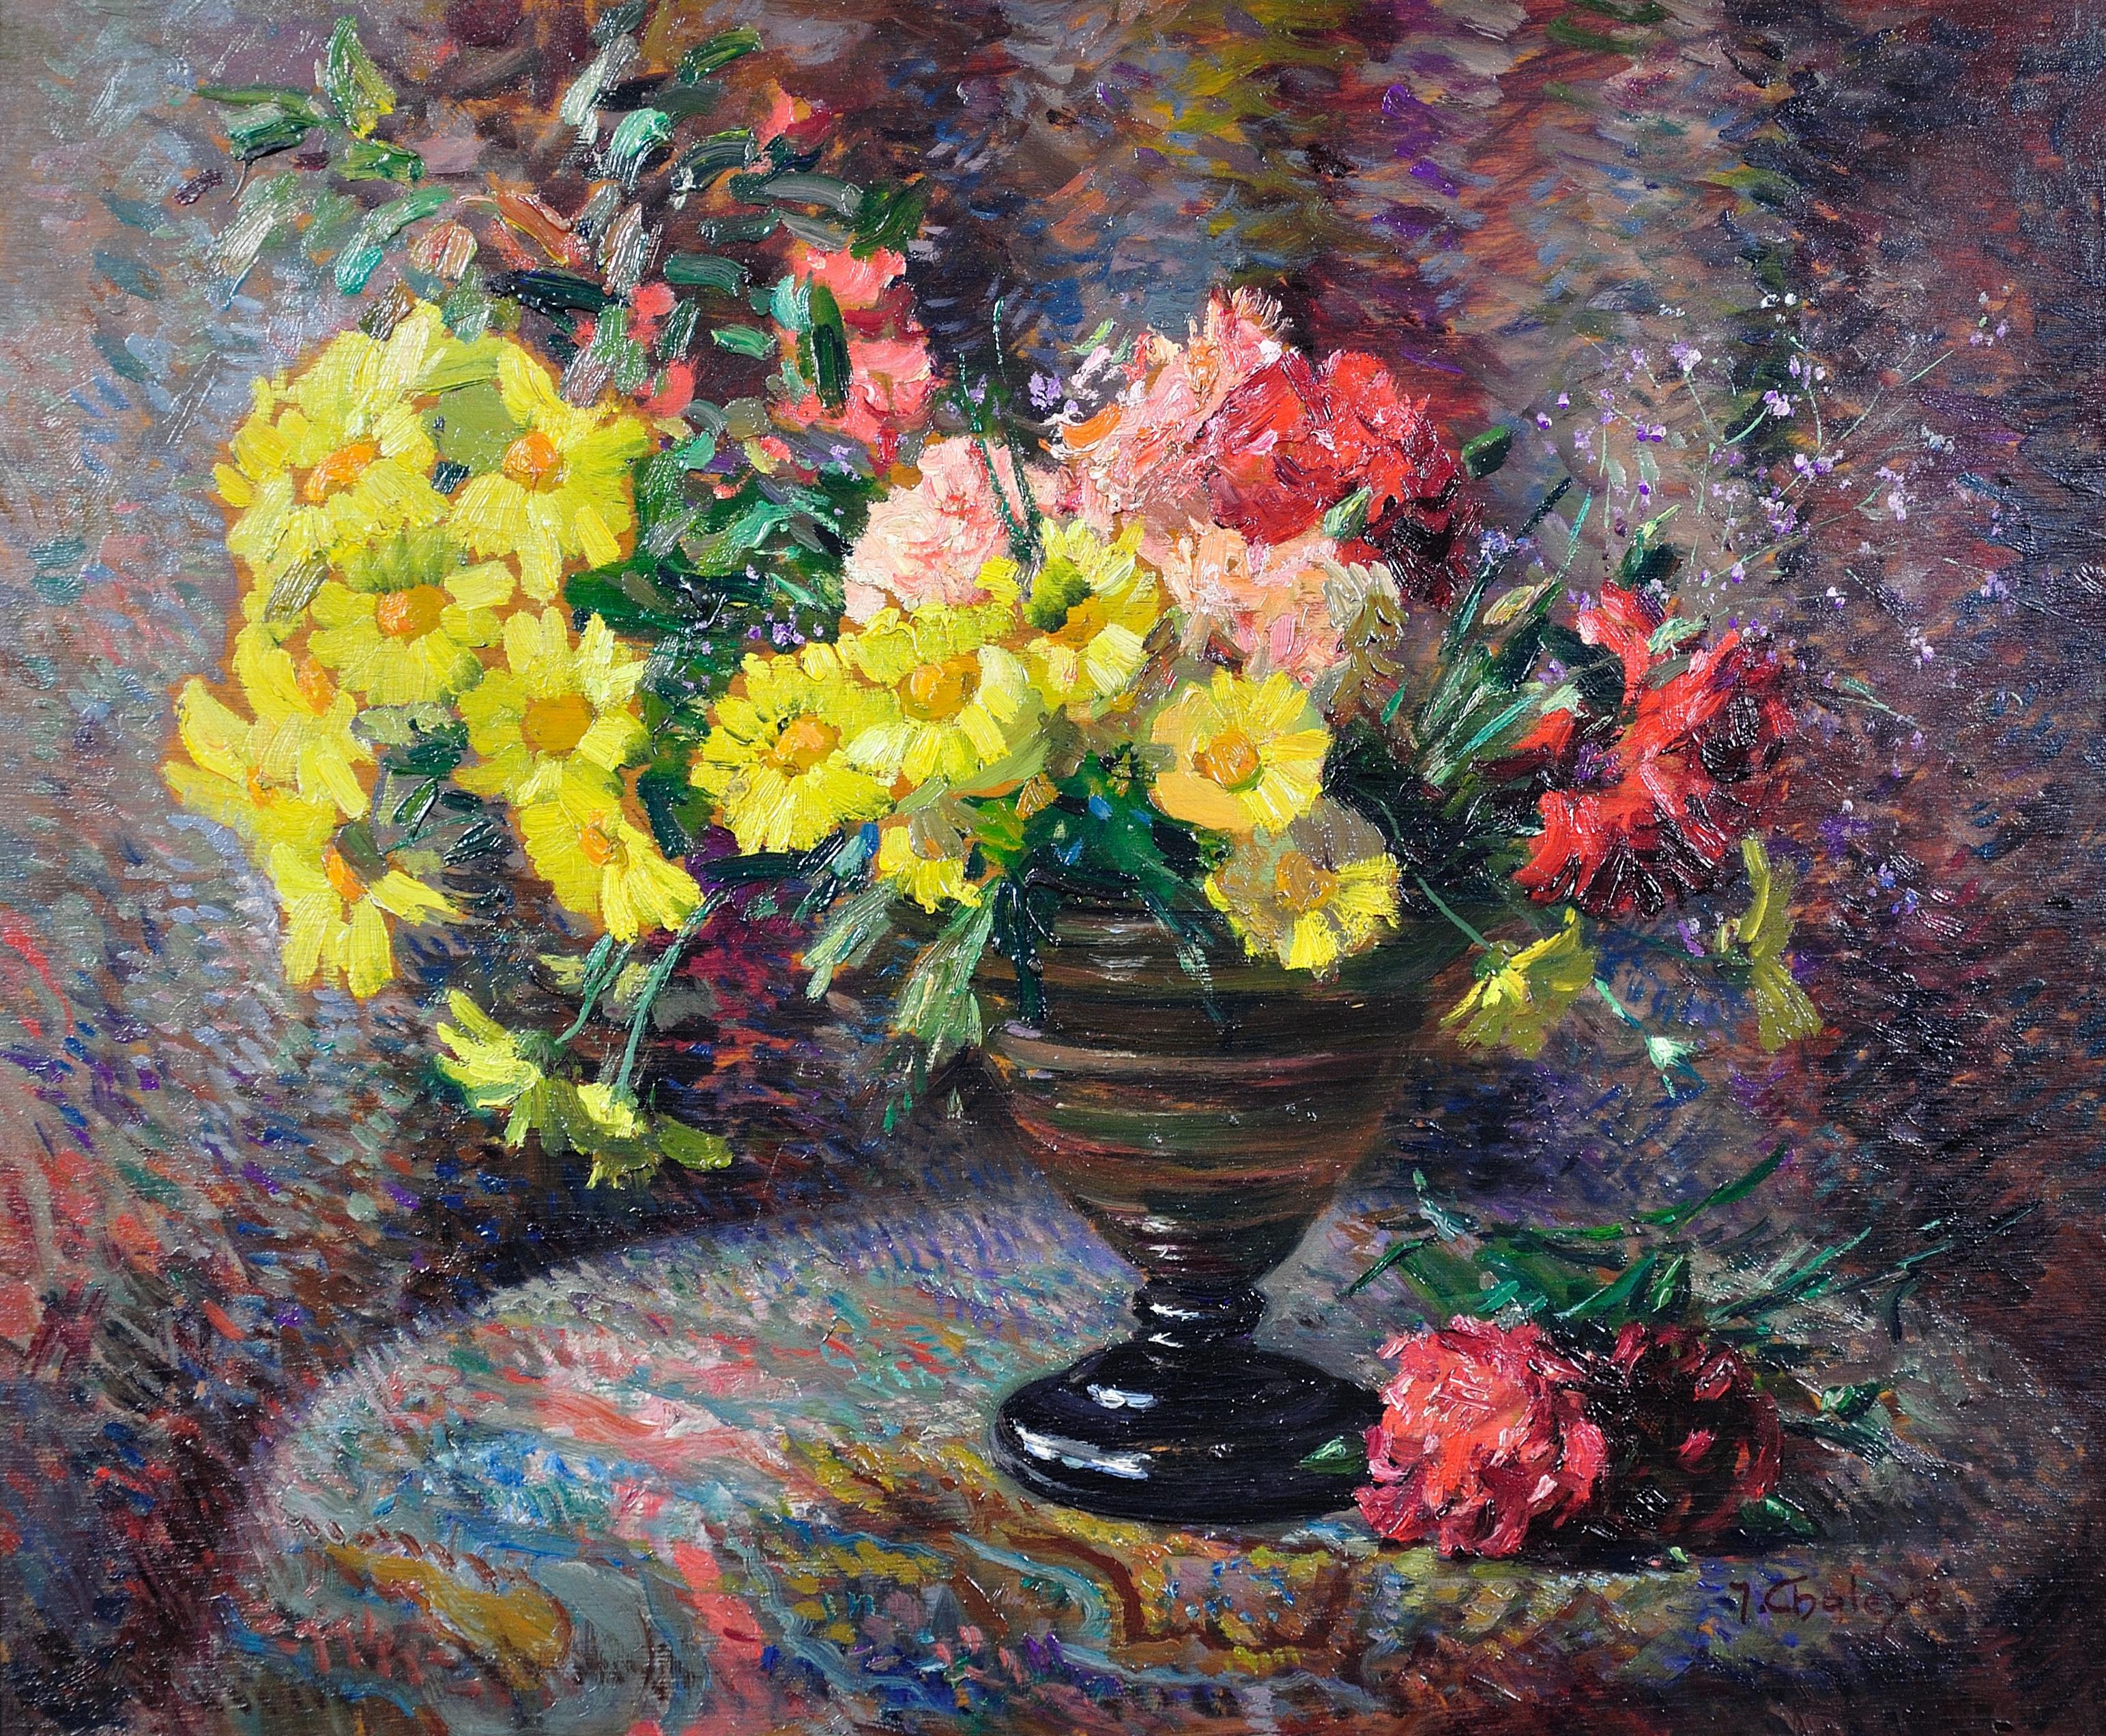 Jean Chaleye. 
French ( b.1878 - d.1960 ).
Still life of Carnations & Marigolds.
Oil on Board. Signed.
Image size 20.9 inches x 25.2 inches ( 53cm x 64cm ).
Frame size 27.6 inches x 31.9 inches ( 70cm x 81cm ).

Available for sale; this original oil